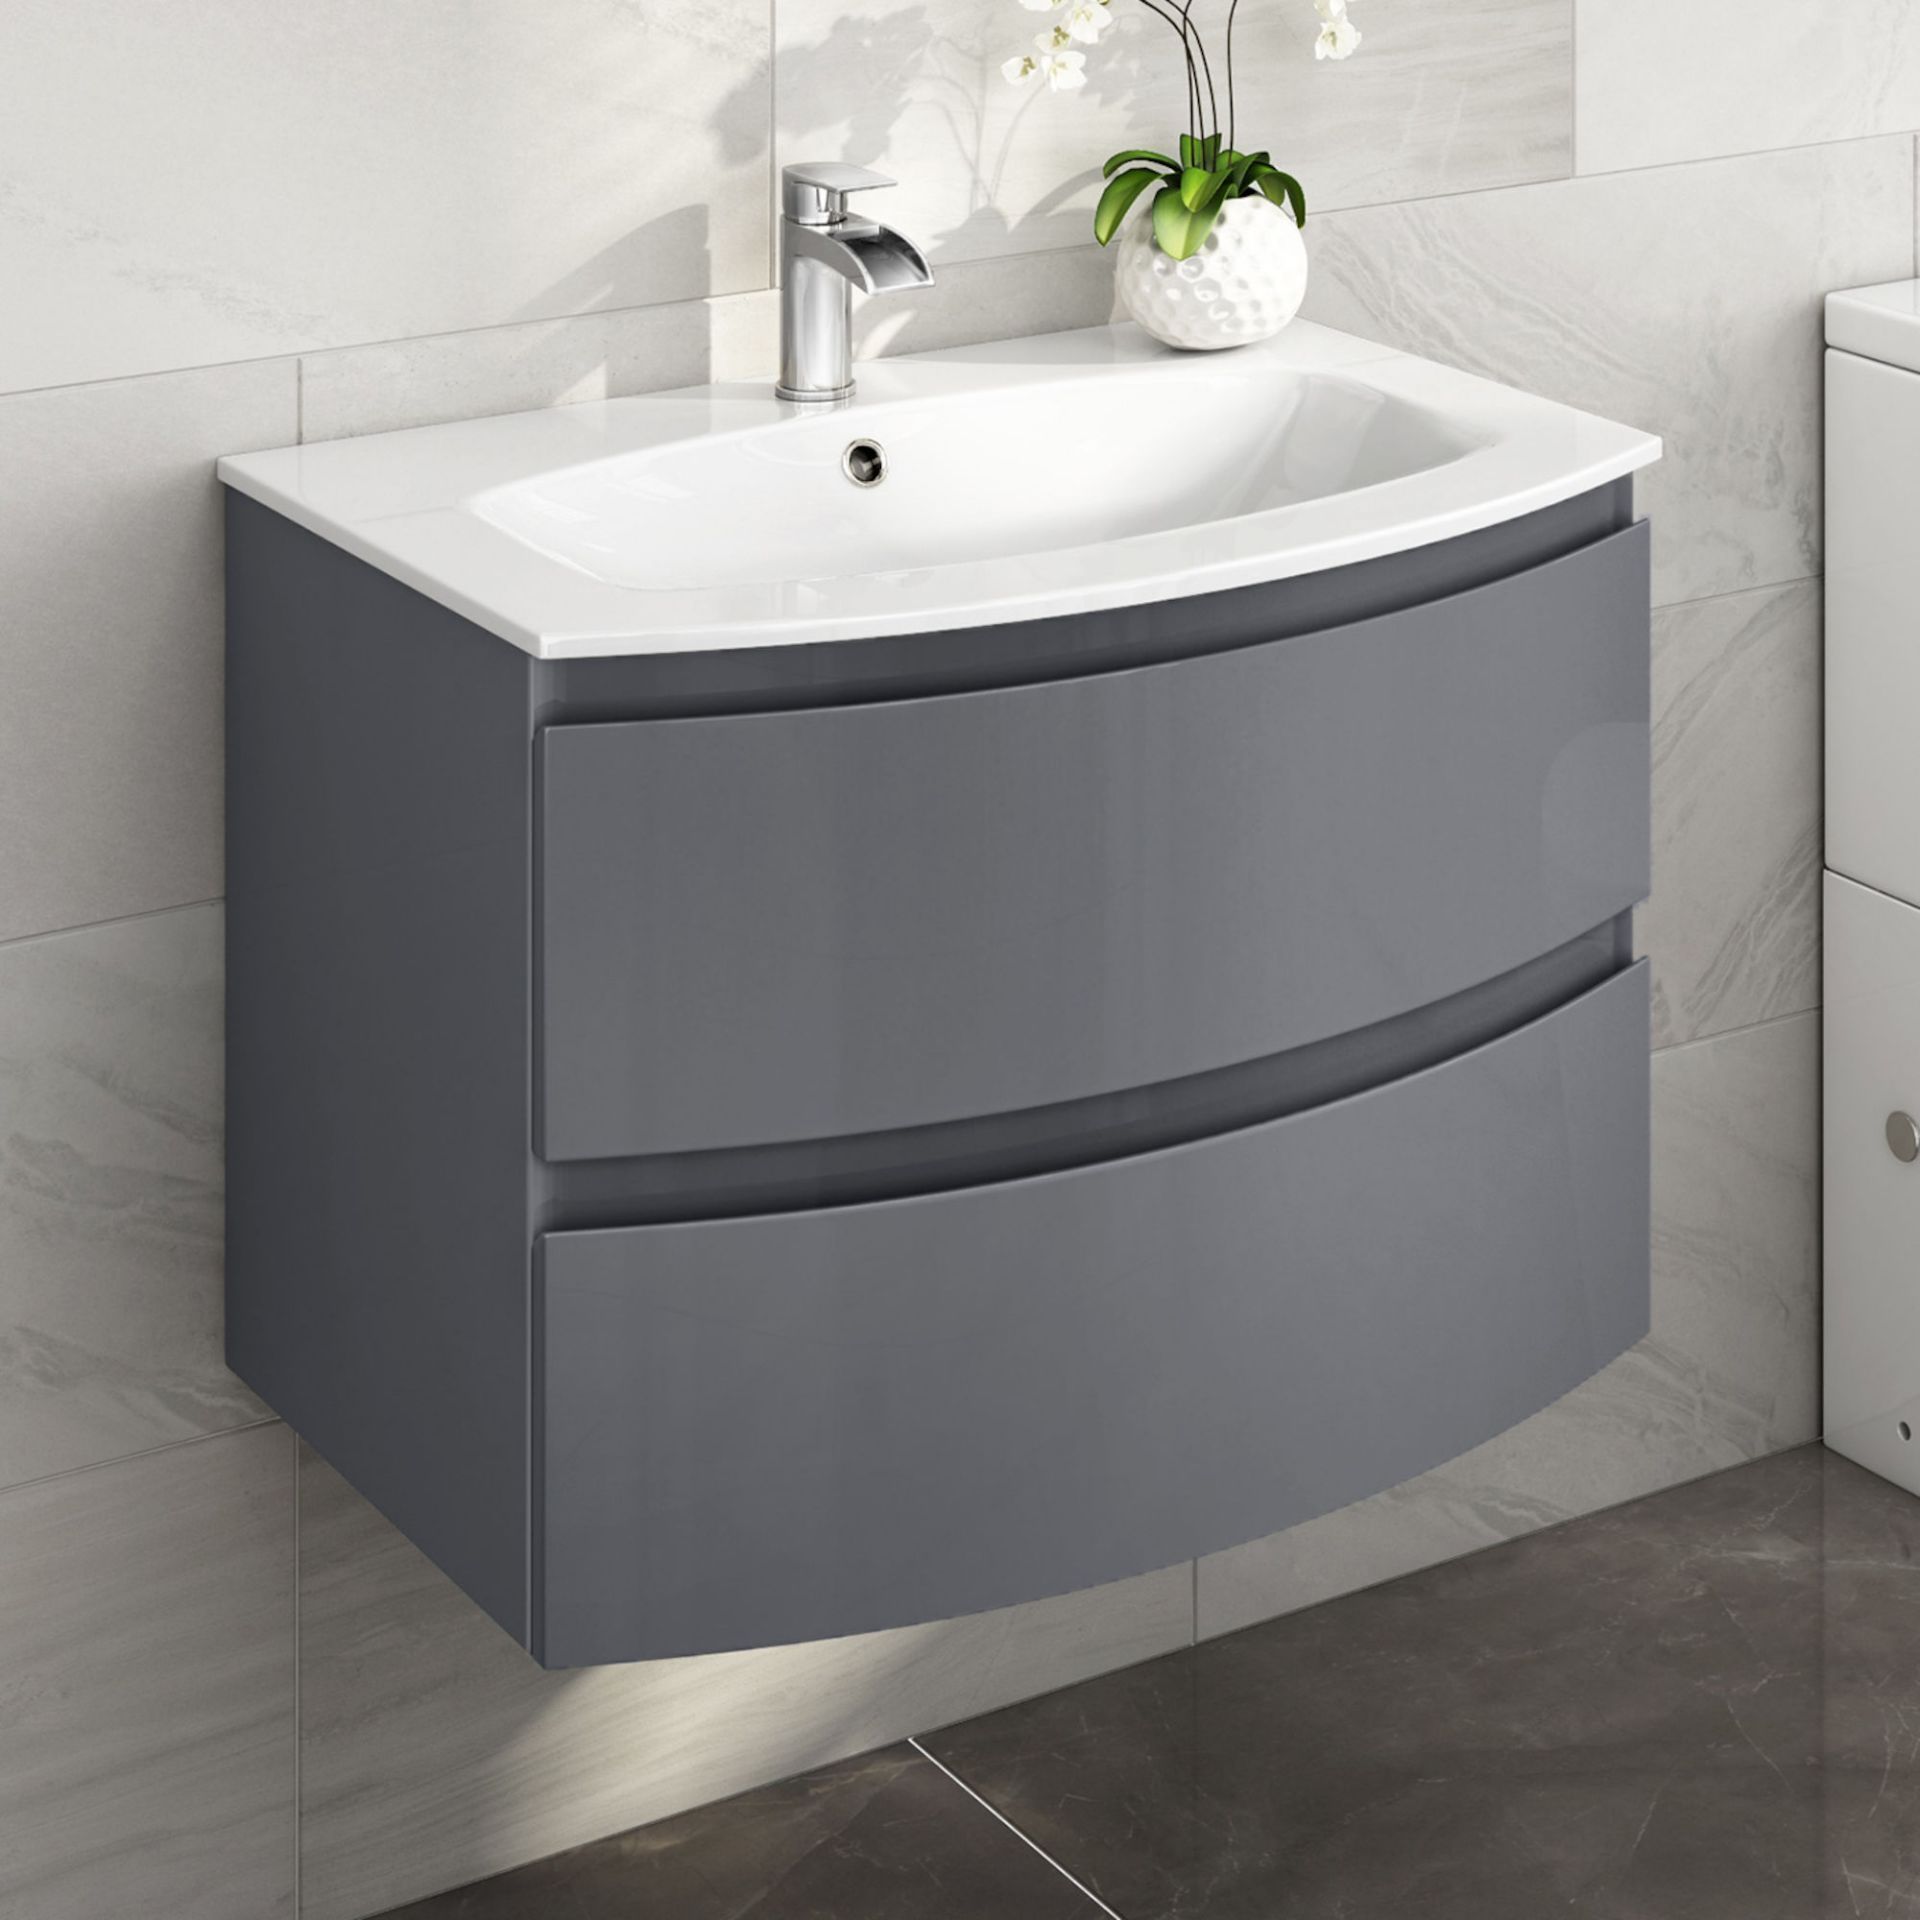 New & Boxed 700mm Amelie Gloss Grey Curved Vanity Unit - Wall Hung. RRP £999.99.Comes Complete With - Image 3 of 3